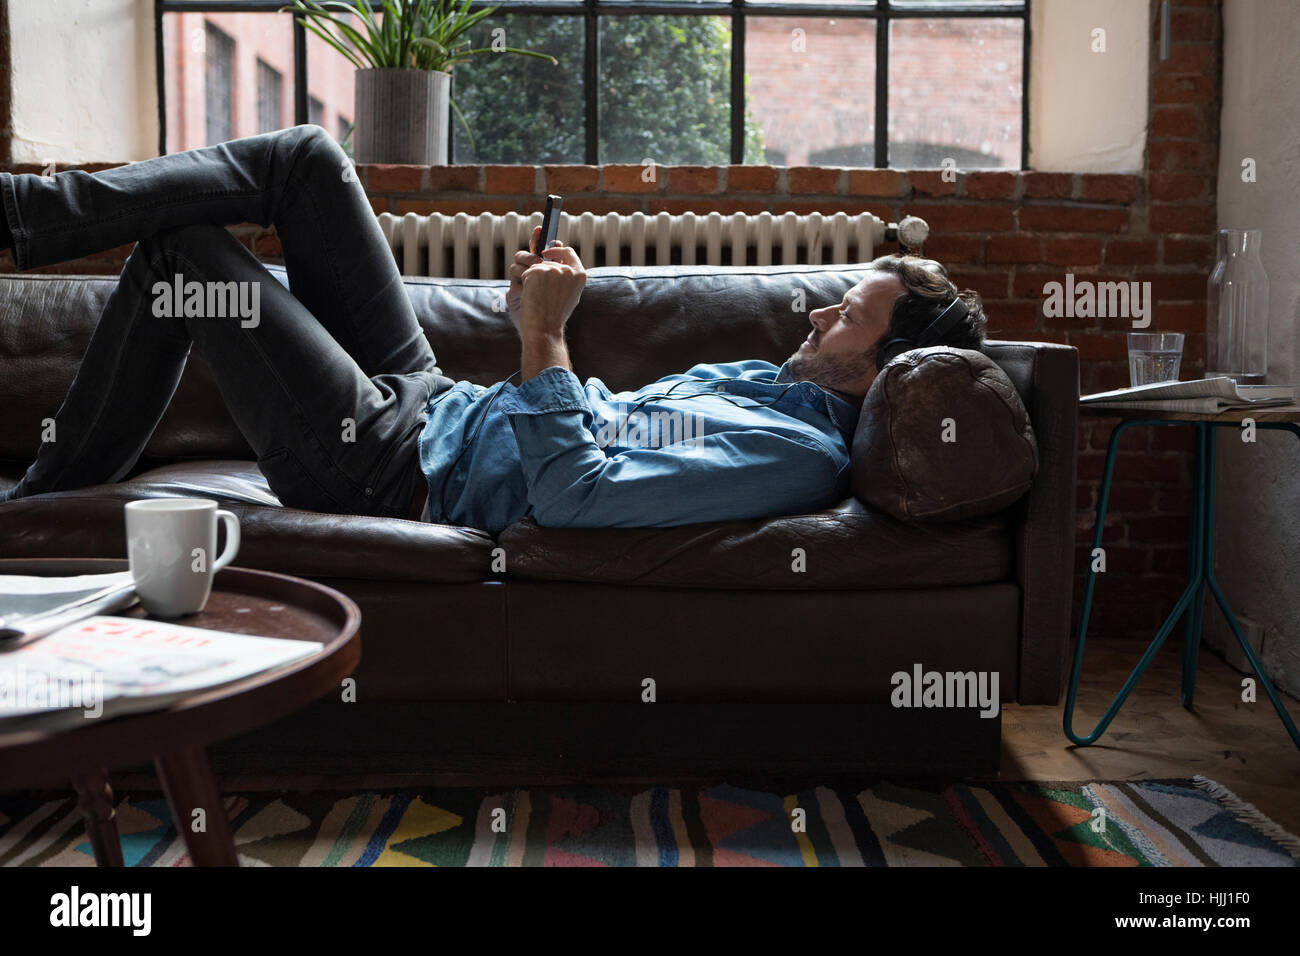 Man lying on couch, using smart phone Stock Photo